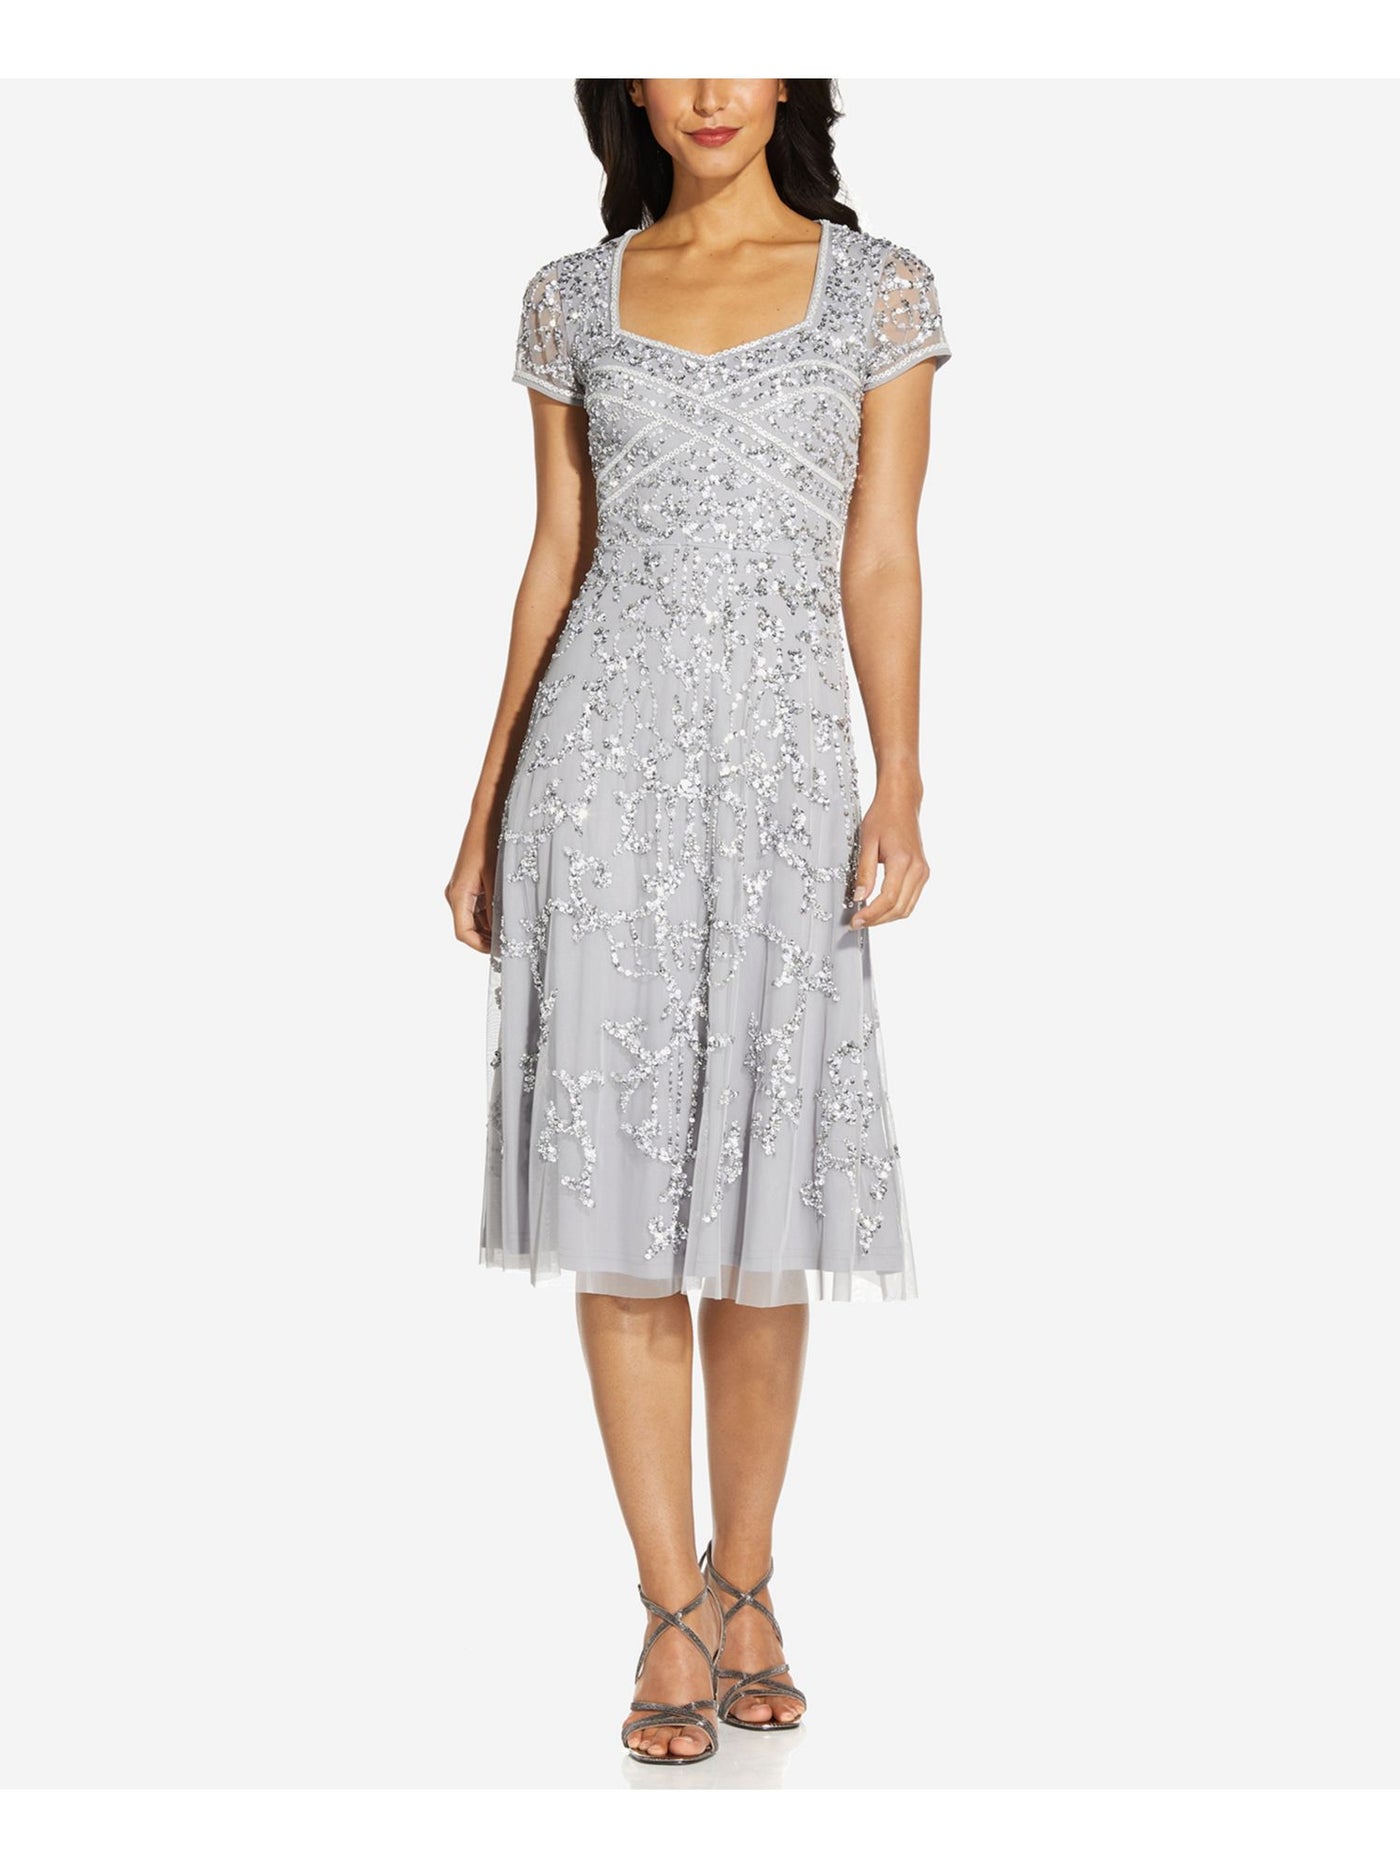 ADRIANNA PAPELL Womens Gray Embellished Zippered Cap Sleeve Queen Anne Neckline Below The Knee Formal Fit + Flare Dress 6